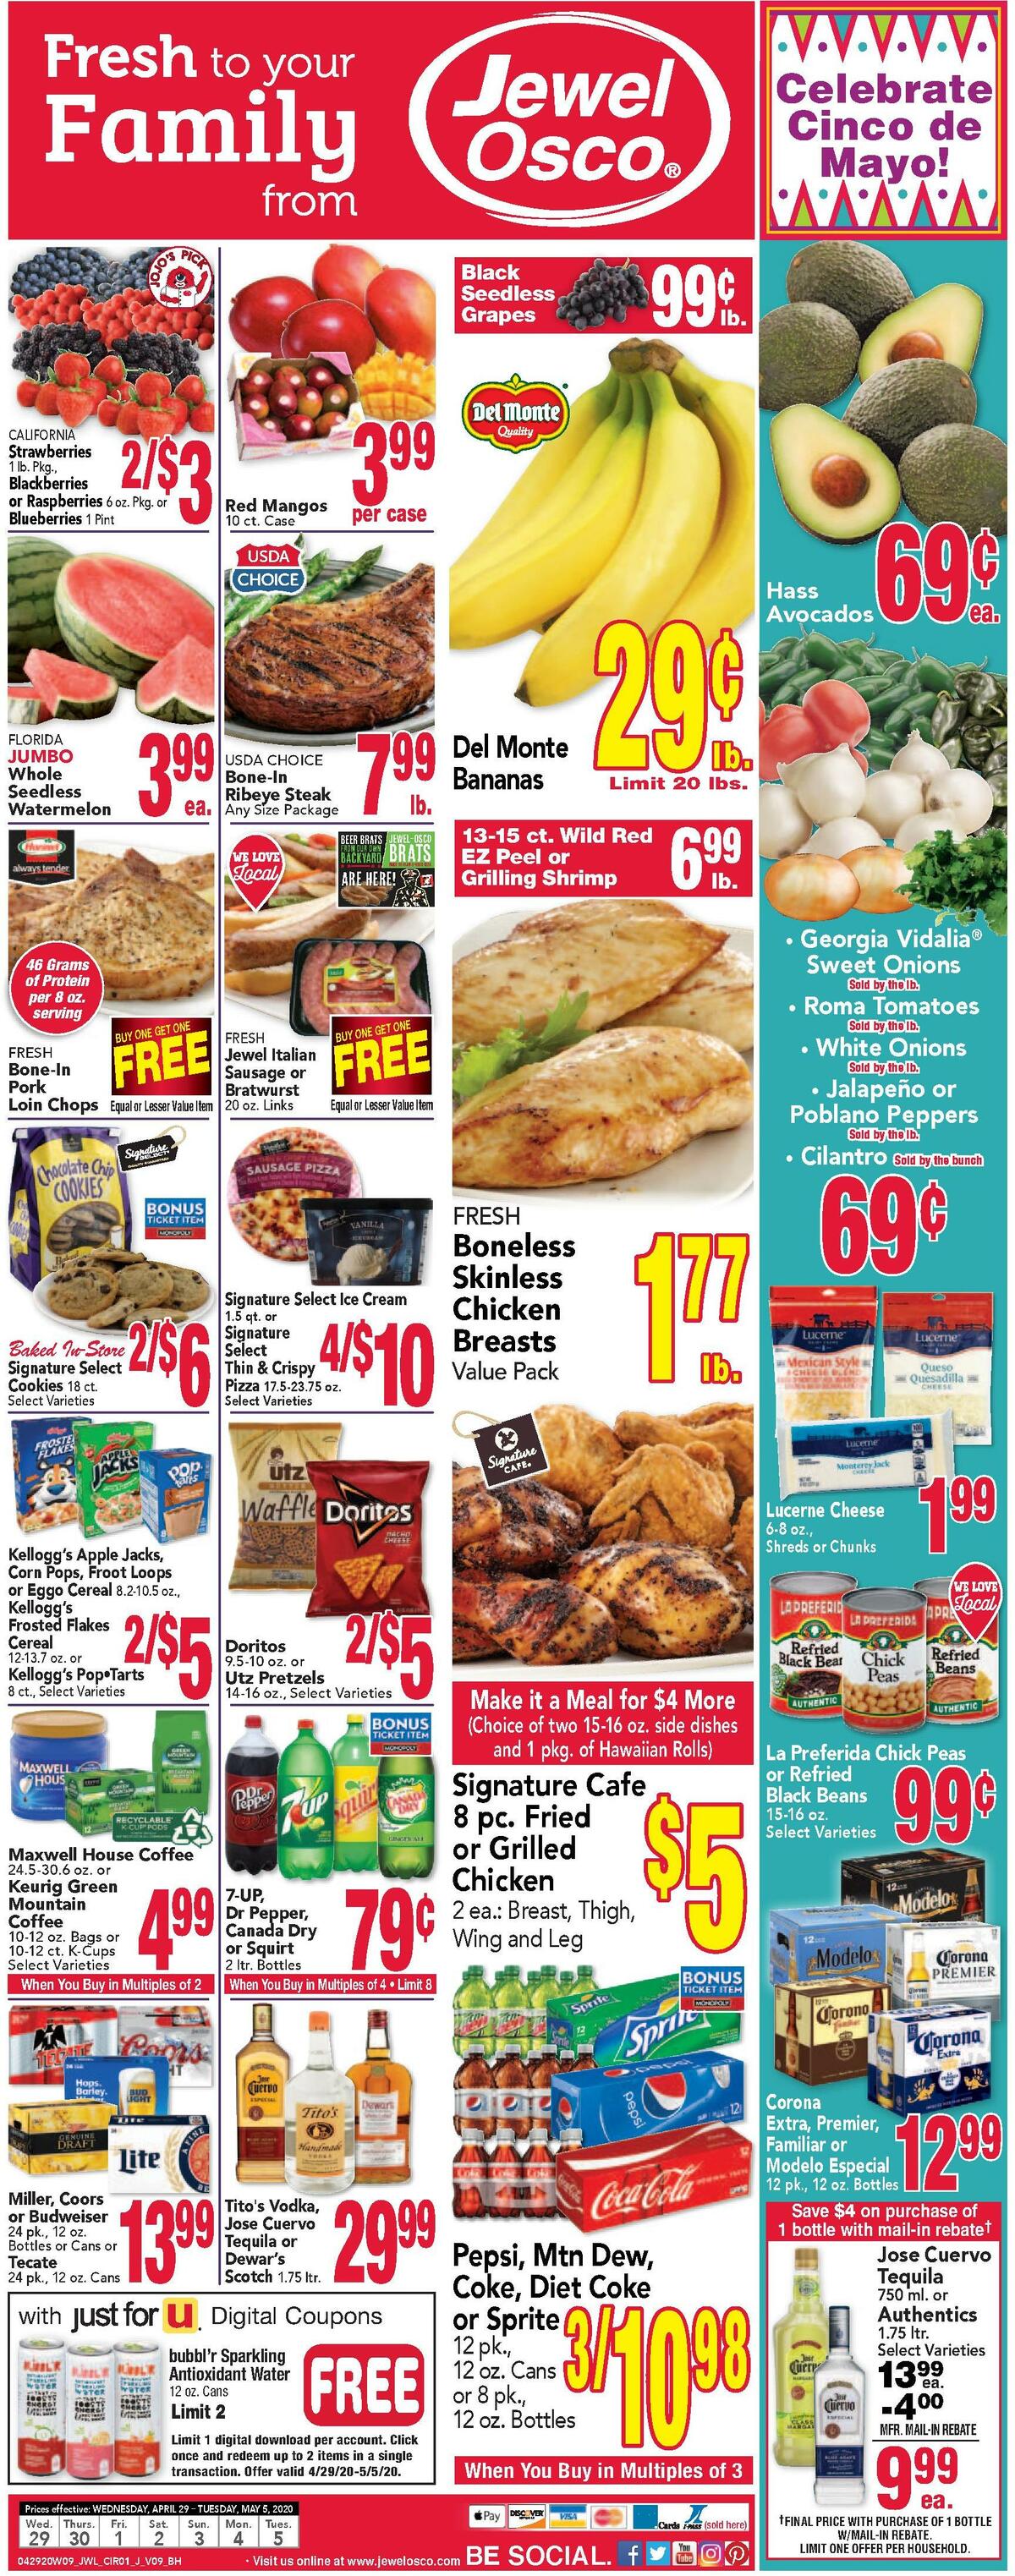 Jewel Osco Weekly Ad from April 29